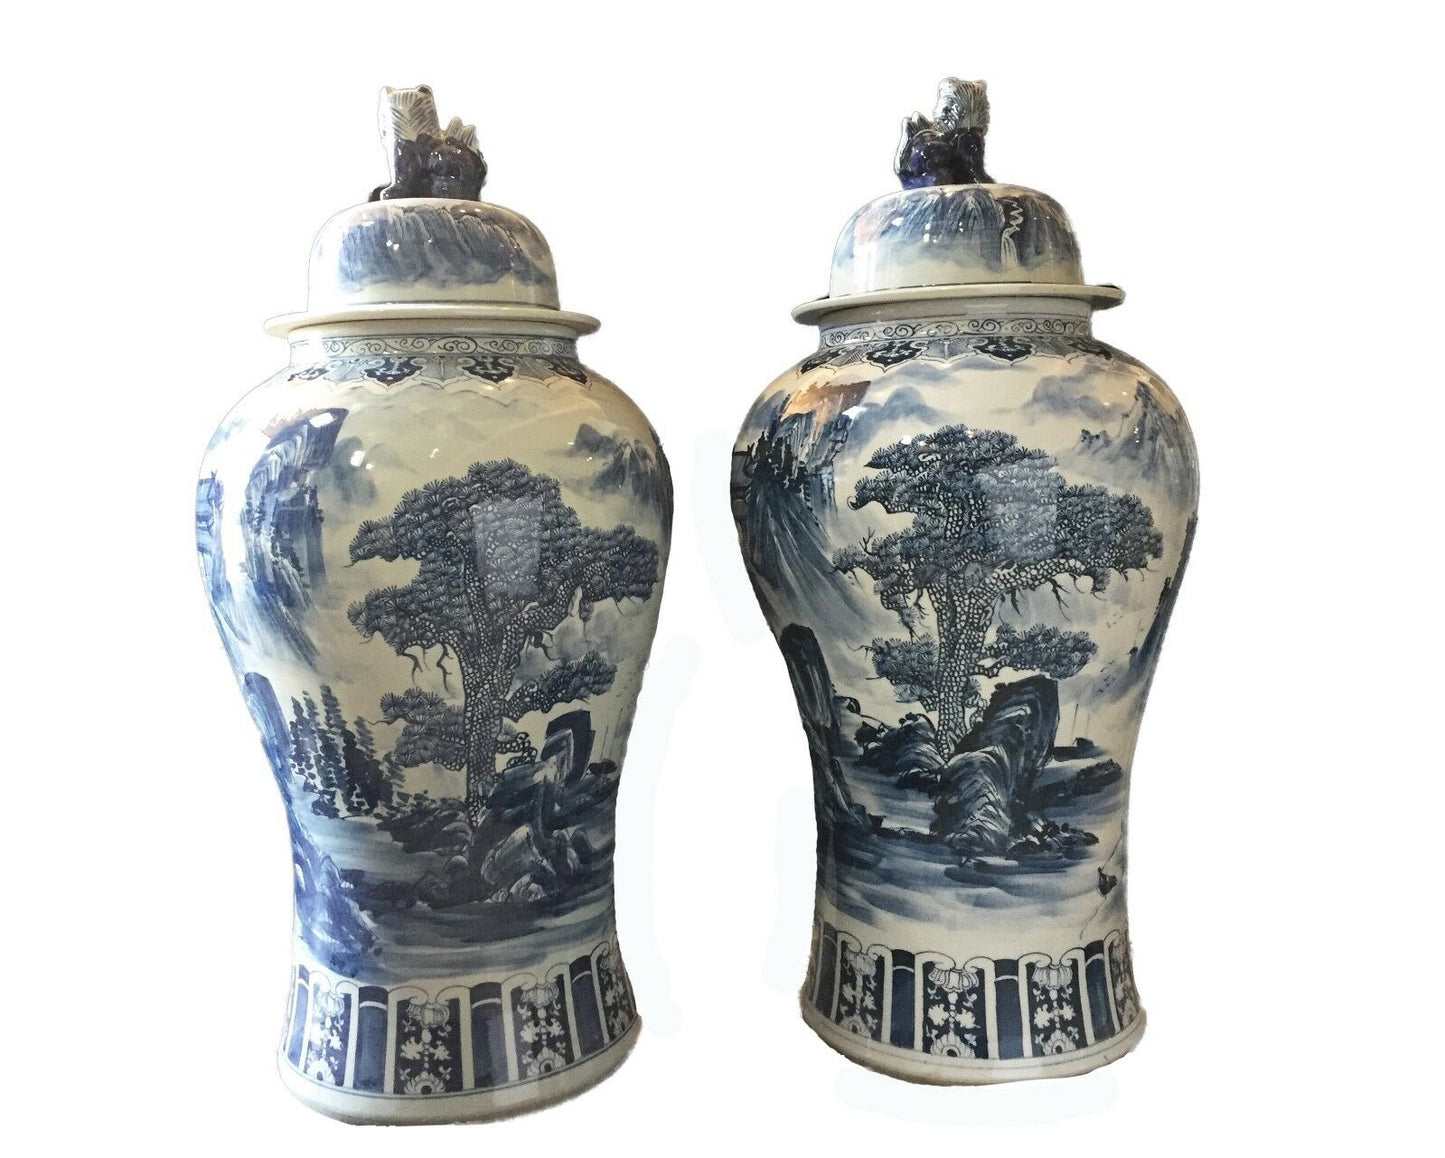 #917 Mansion Size Chinoiserie B & W Porcelain Ginger Jars - a Pair 47" H